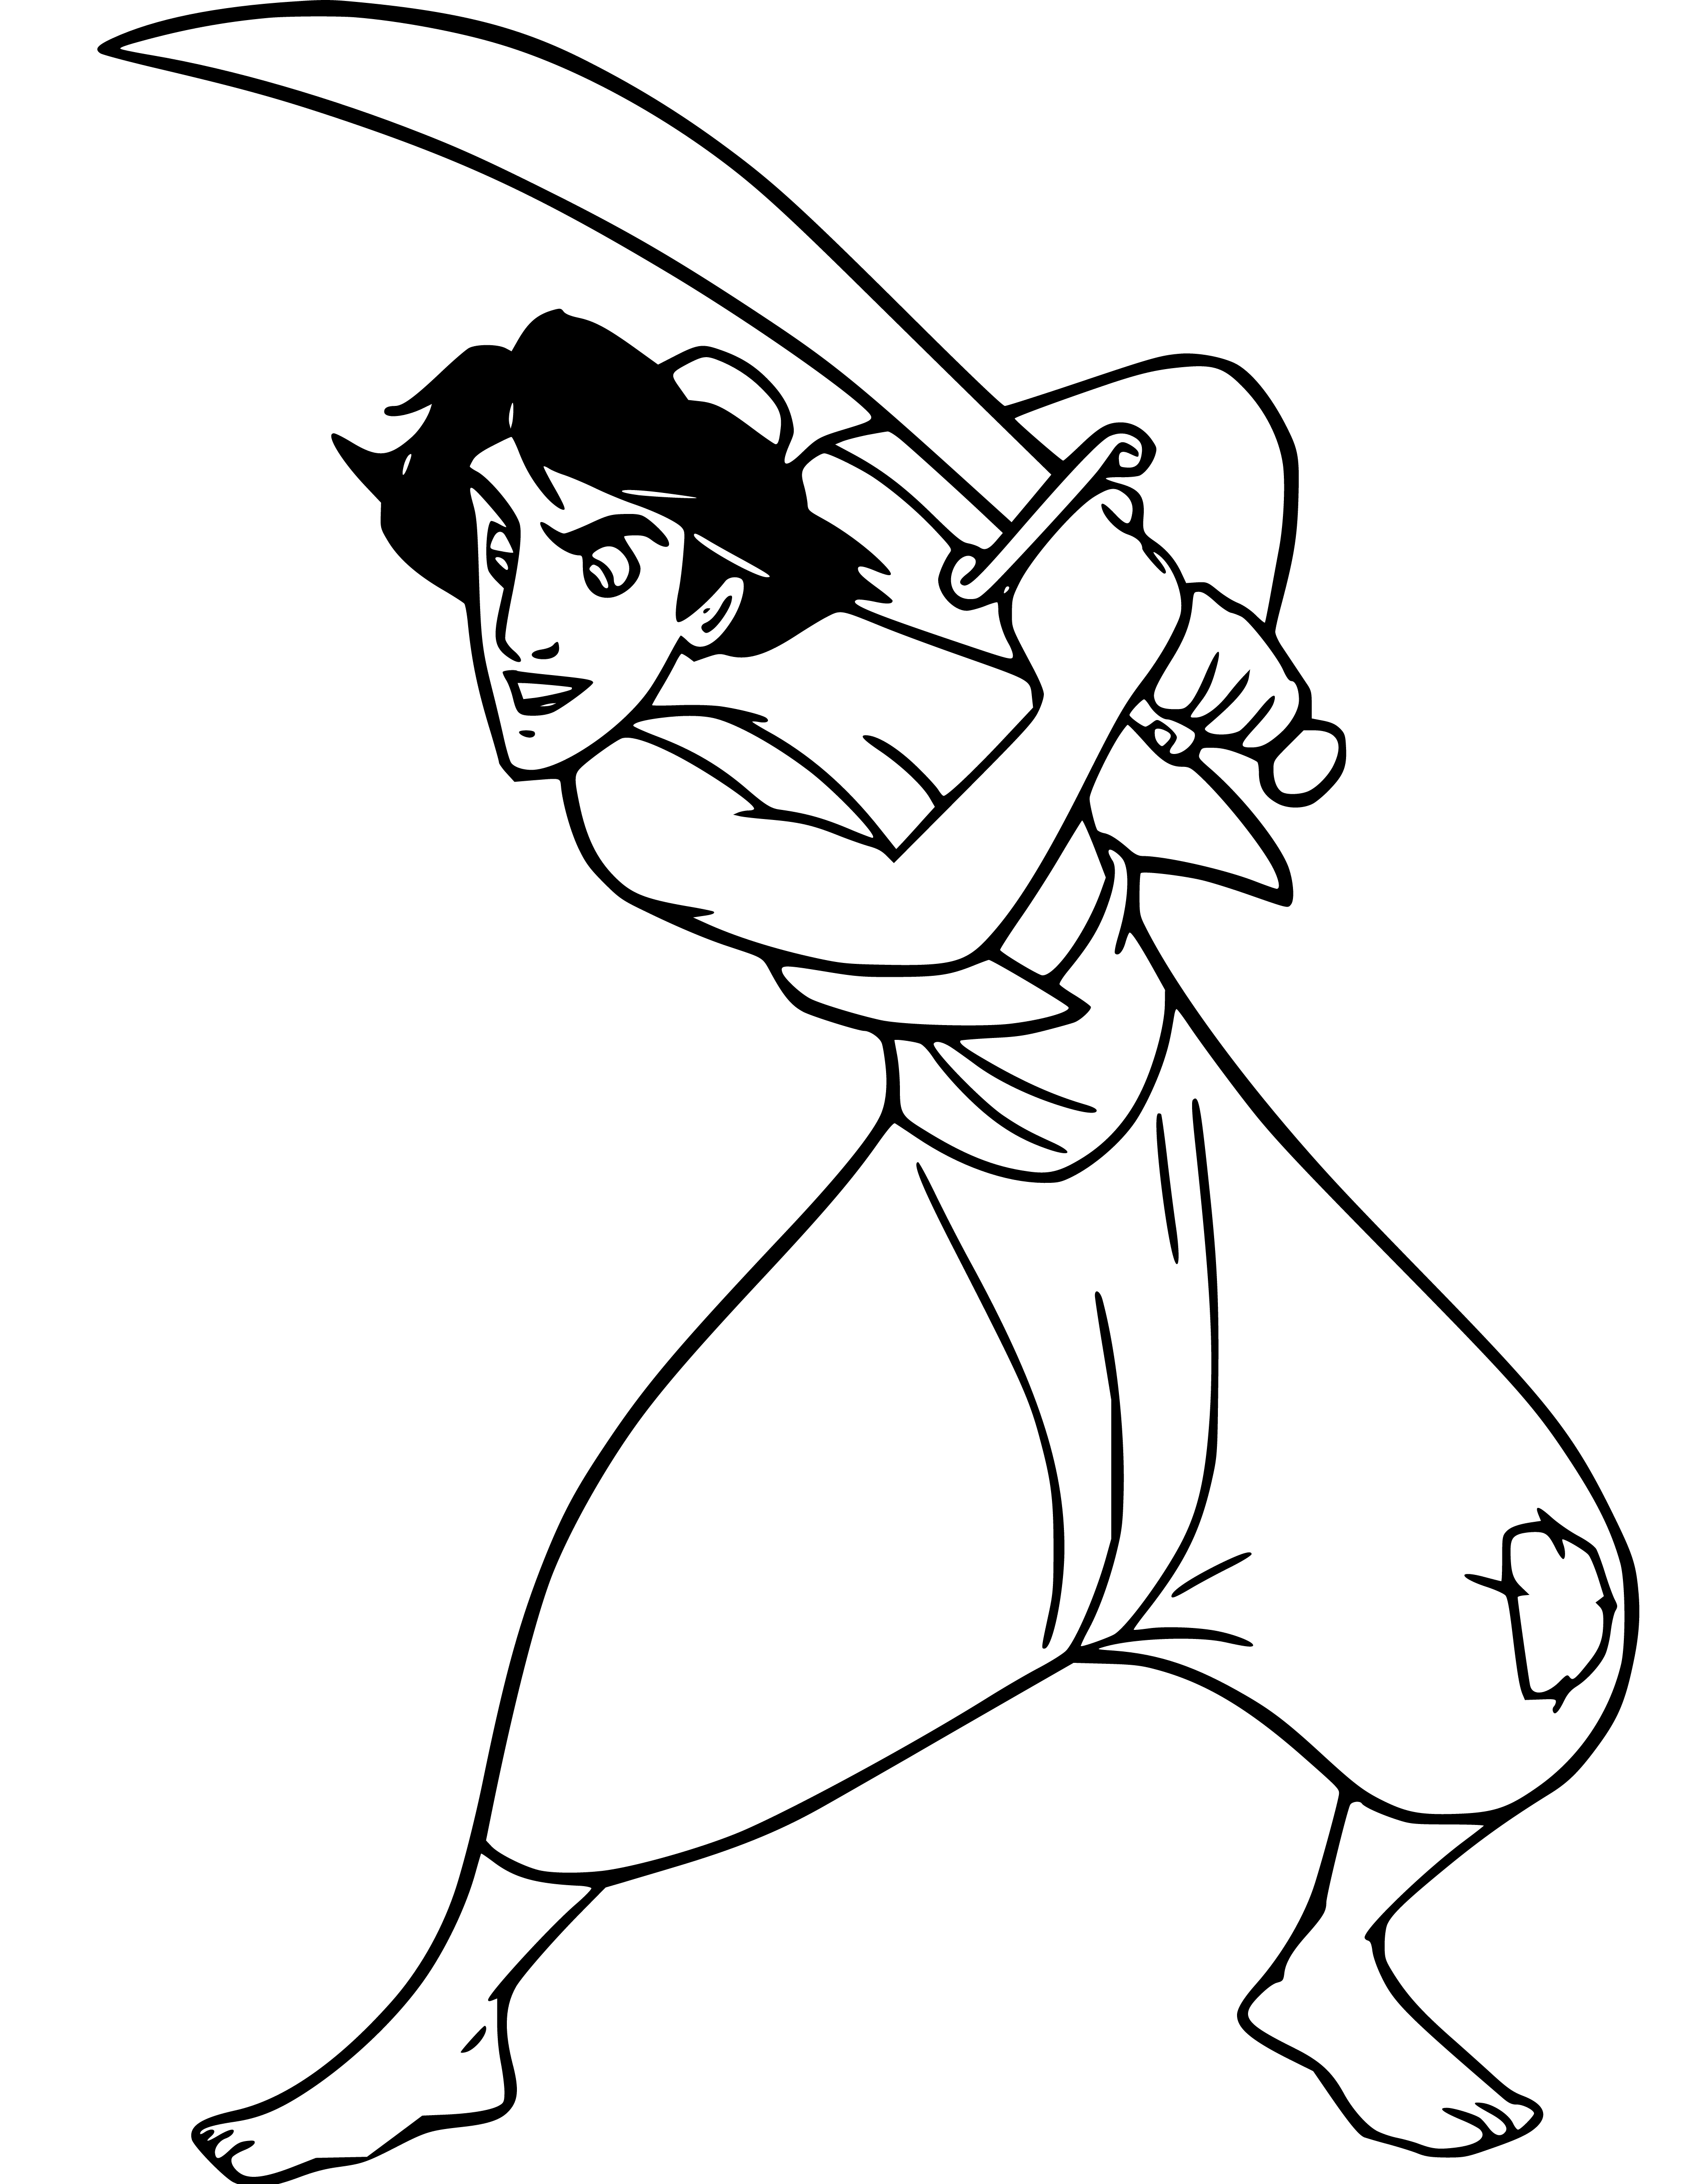 Aladdin holding a sword Coloring Page Printable for Kids, Free, Simple and Easy, as PDF